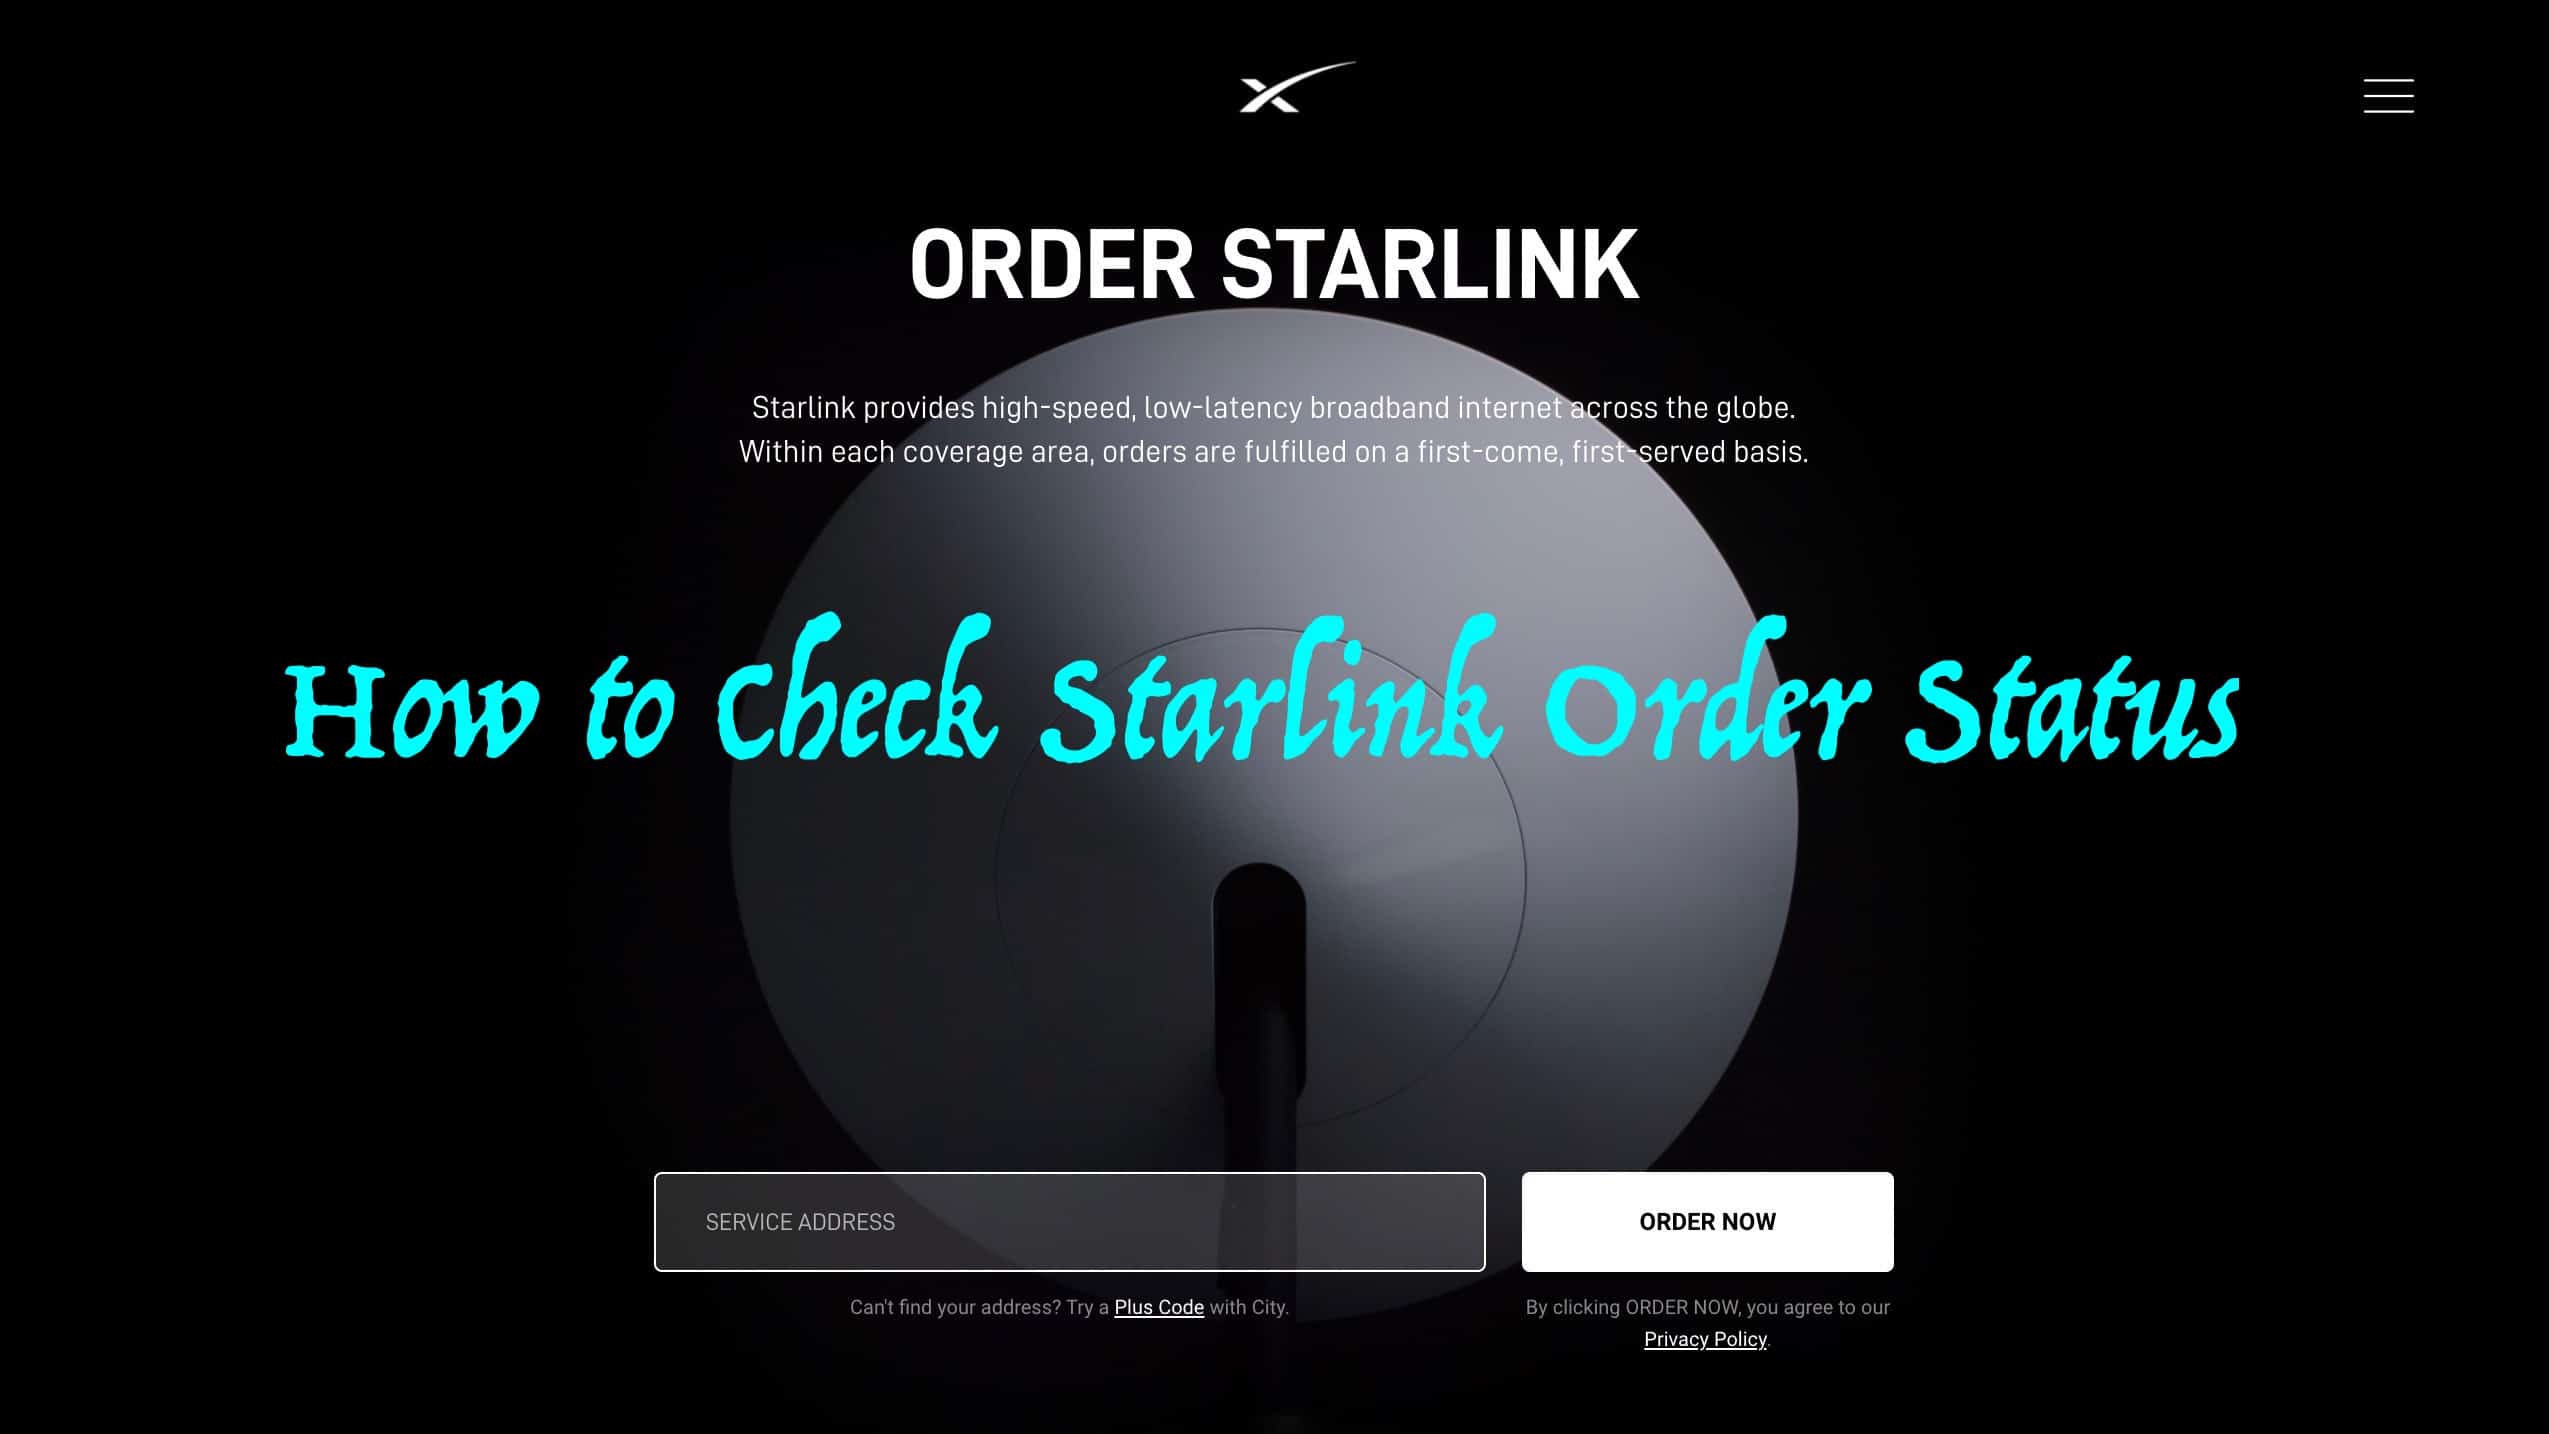 How to Check Starlink Order Status